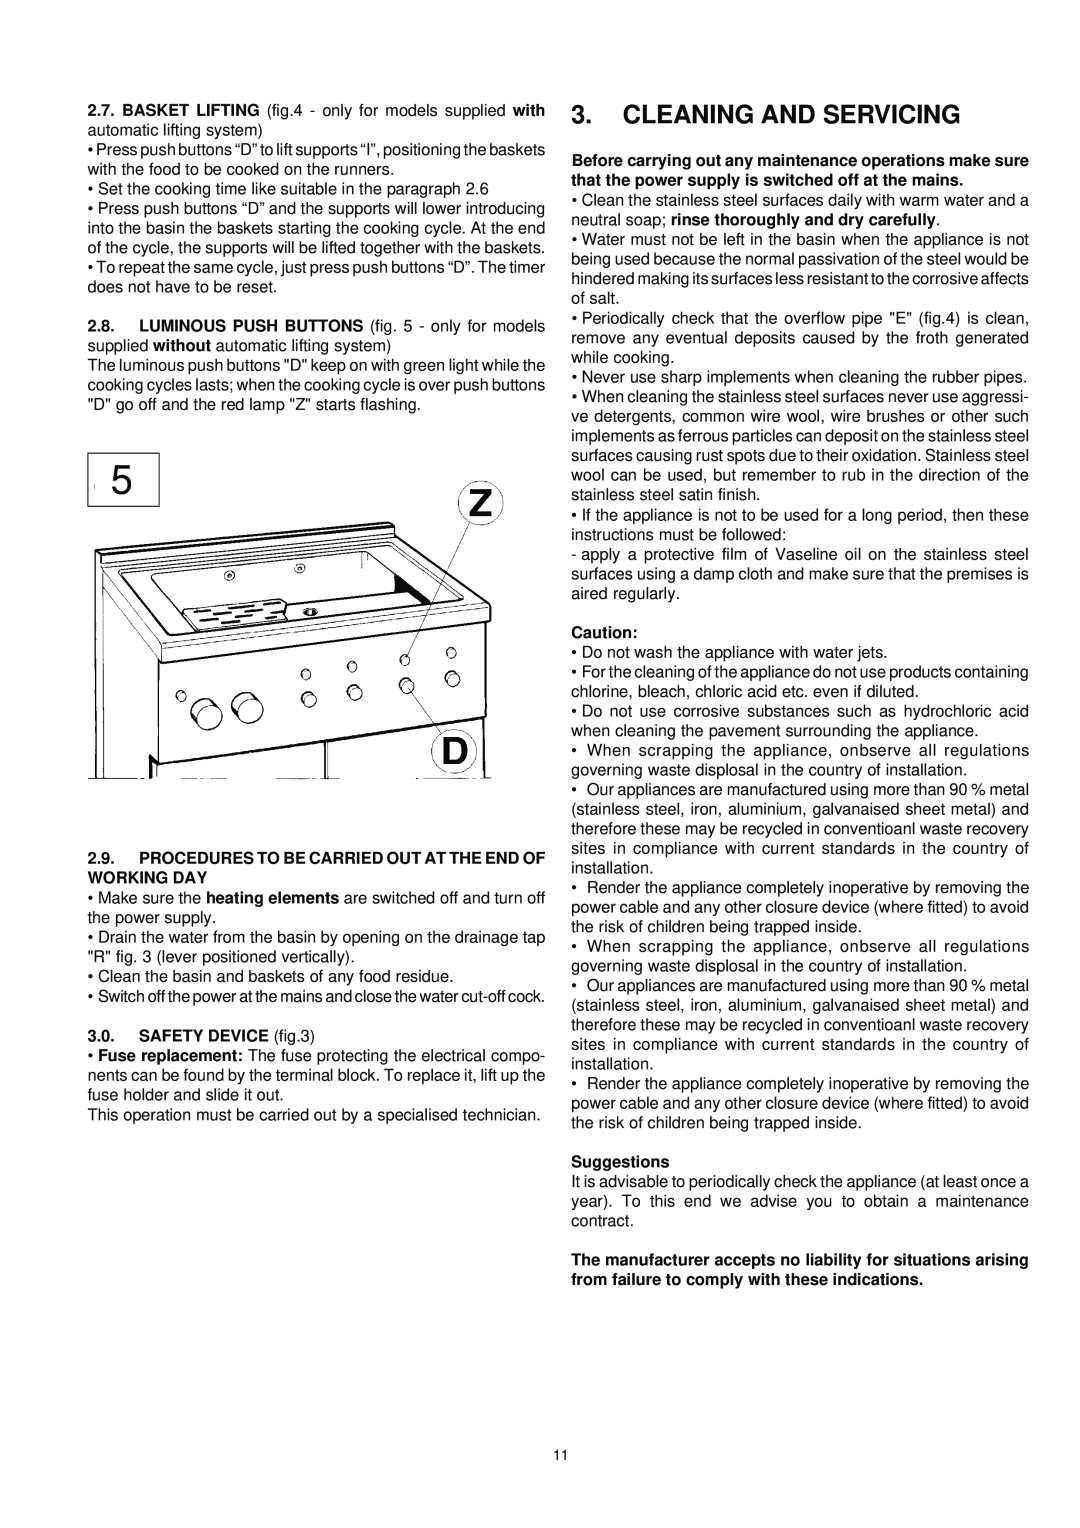 Electrolux PR 700 manual Cleaning And Servicing, Safety Device, Suggestions 